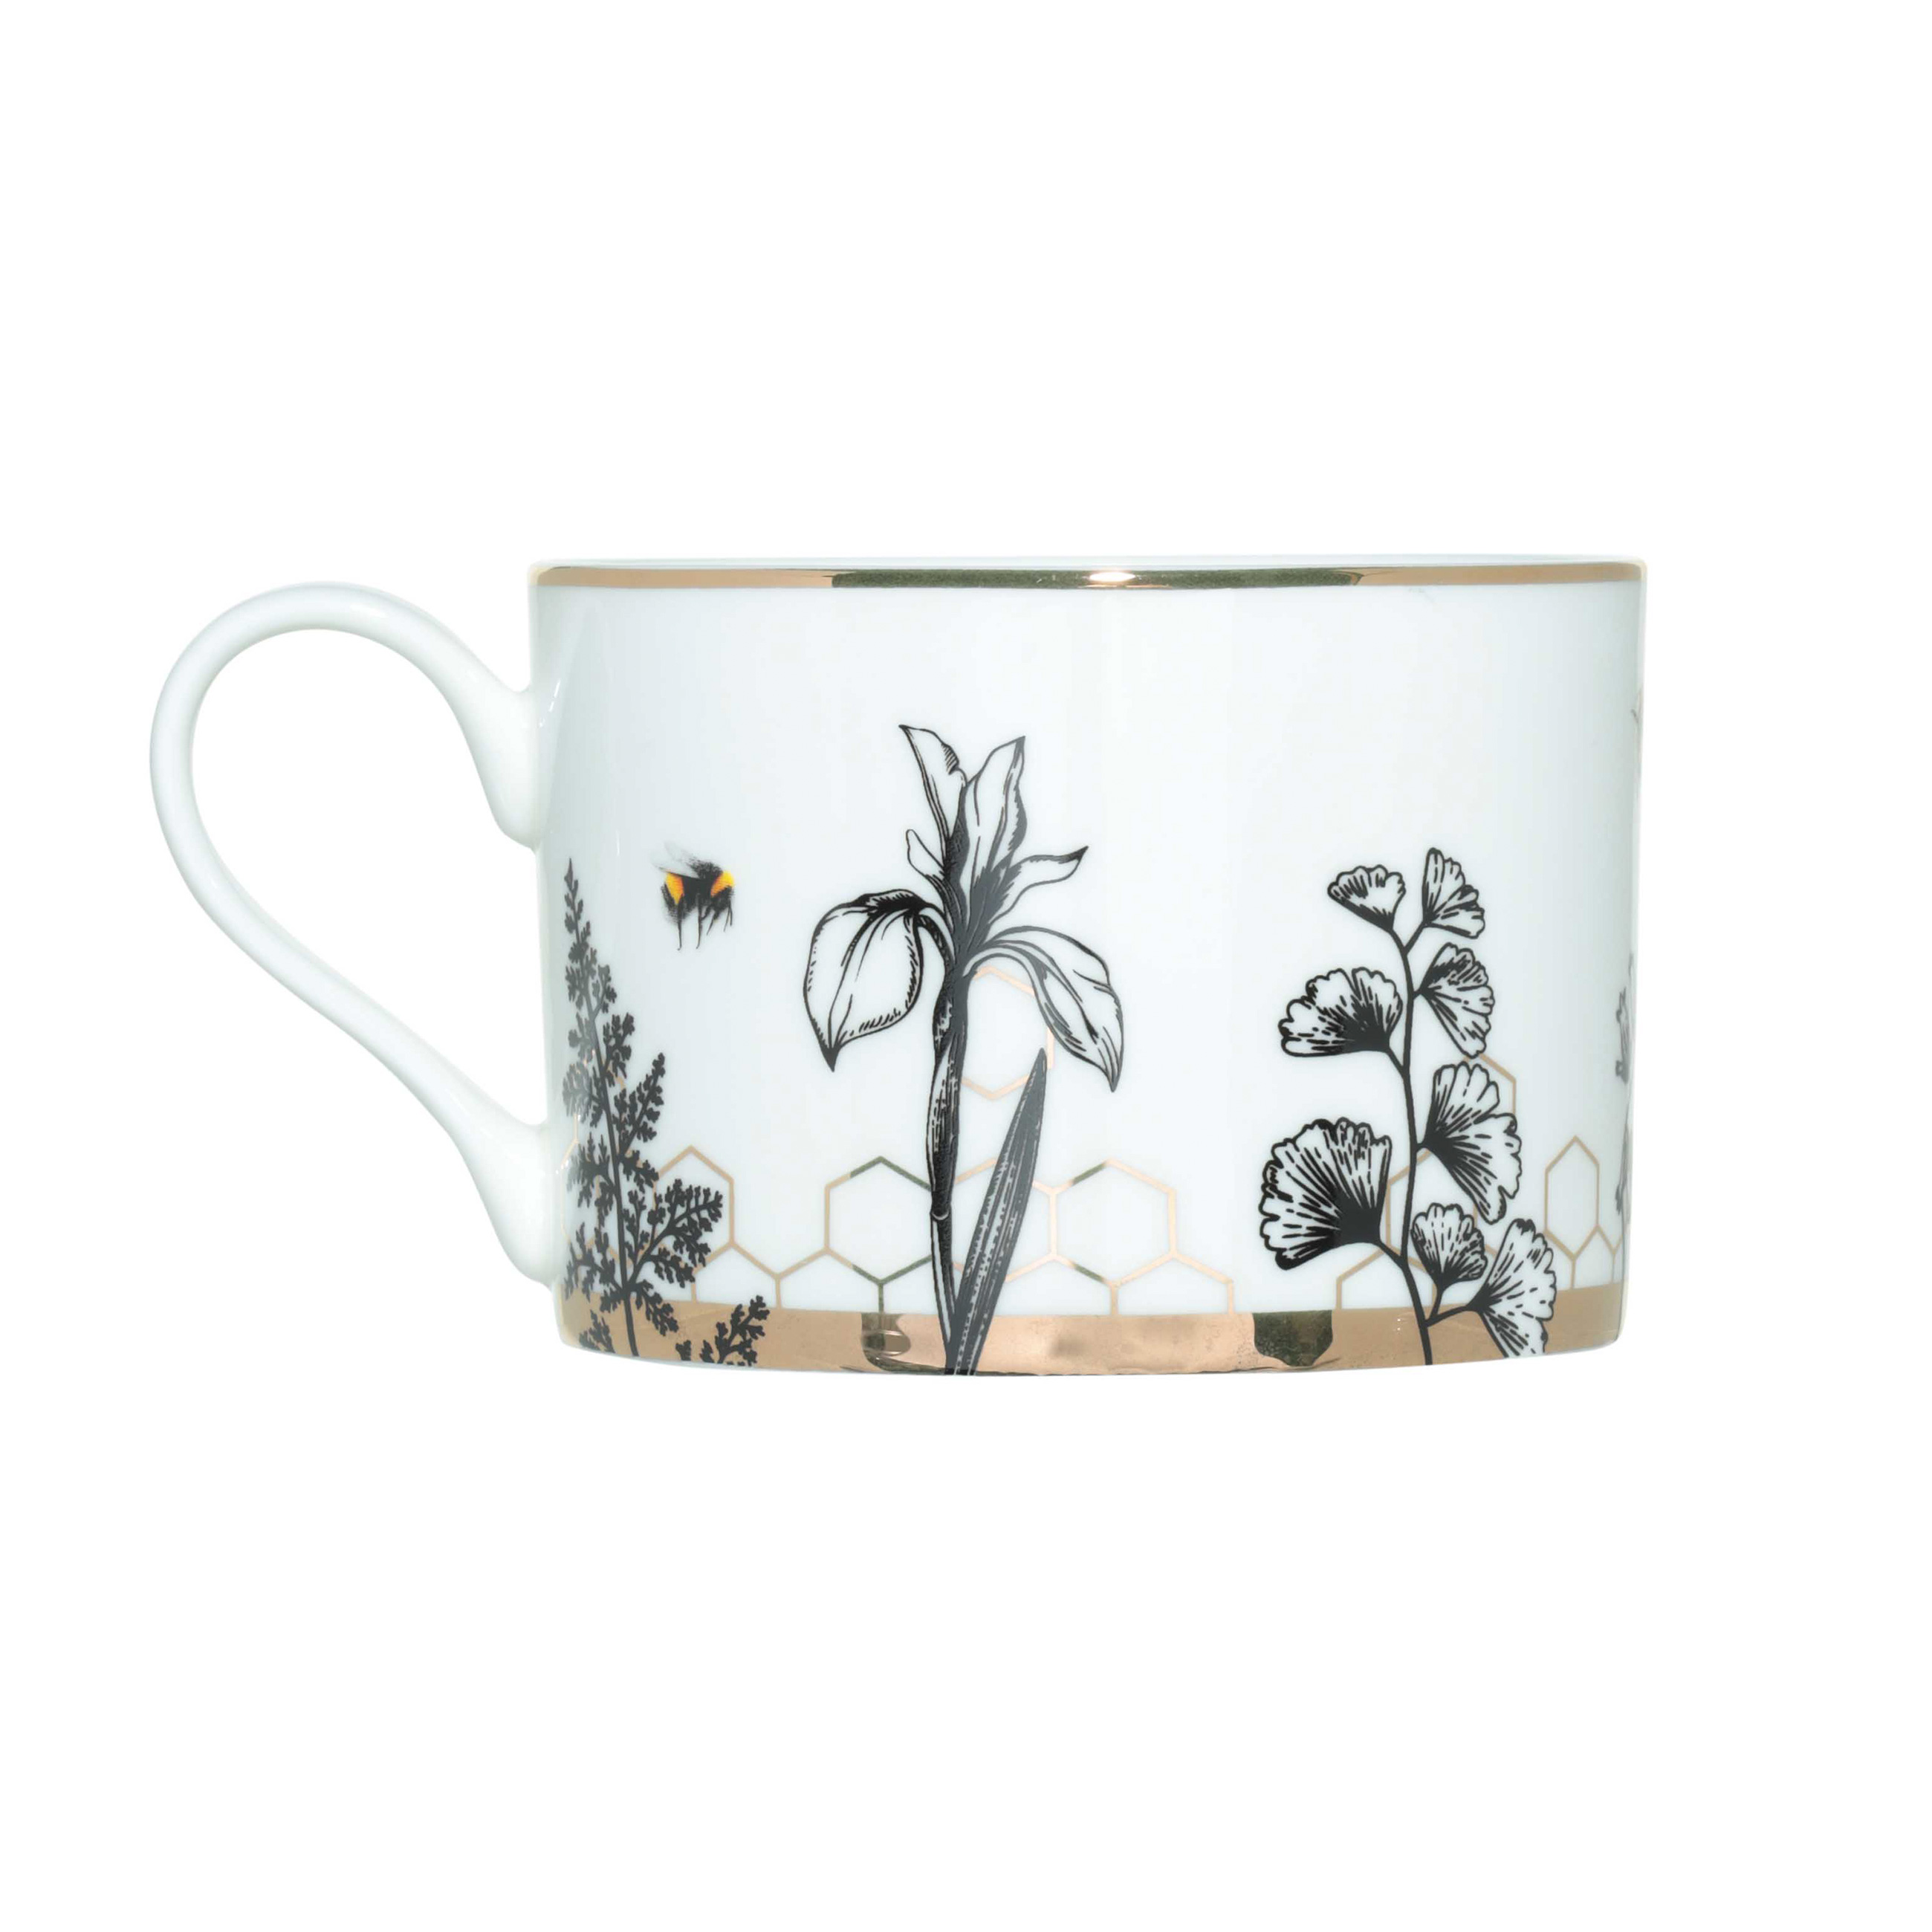 Tea pair, 1 pers, 2 items, 350 ml, porcelain F, white-gold, Bees and honeycombs, Honey изображение № 2